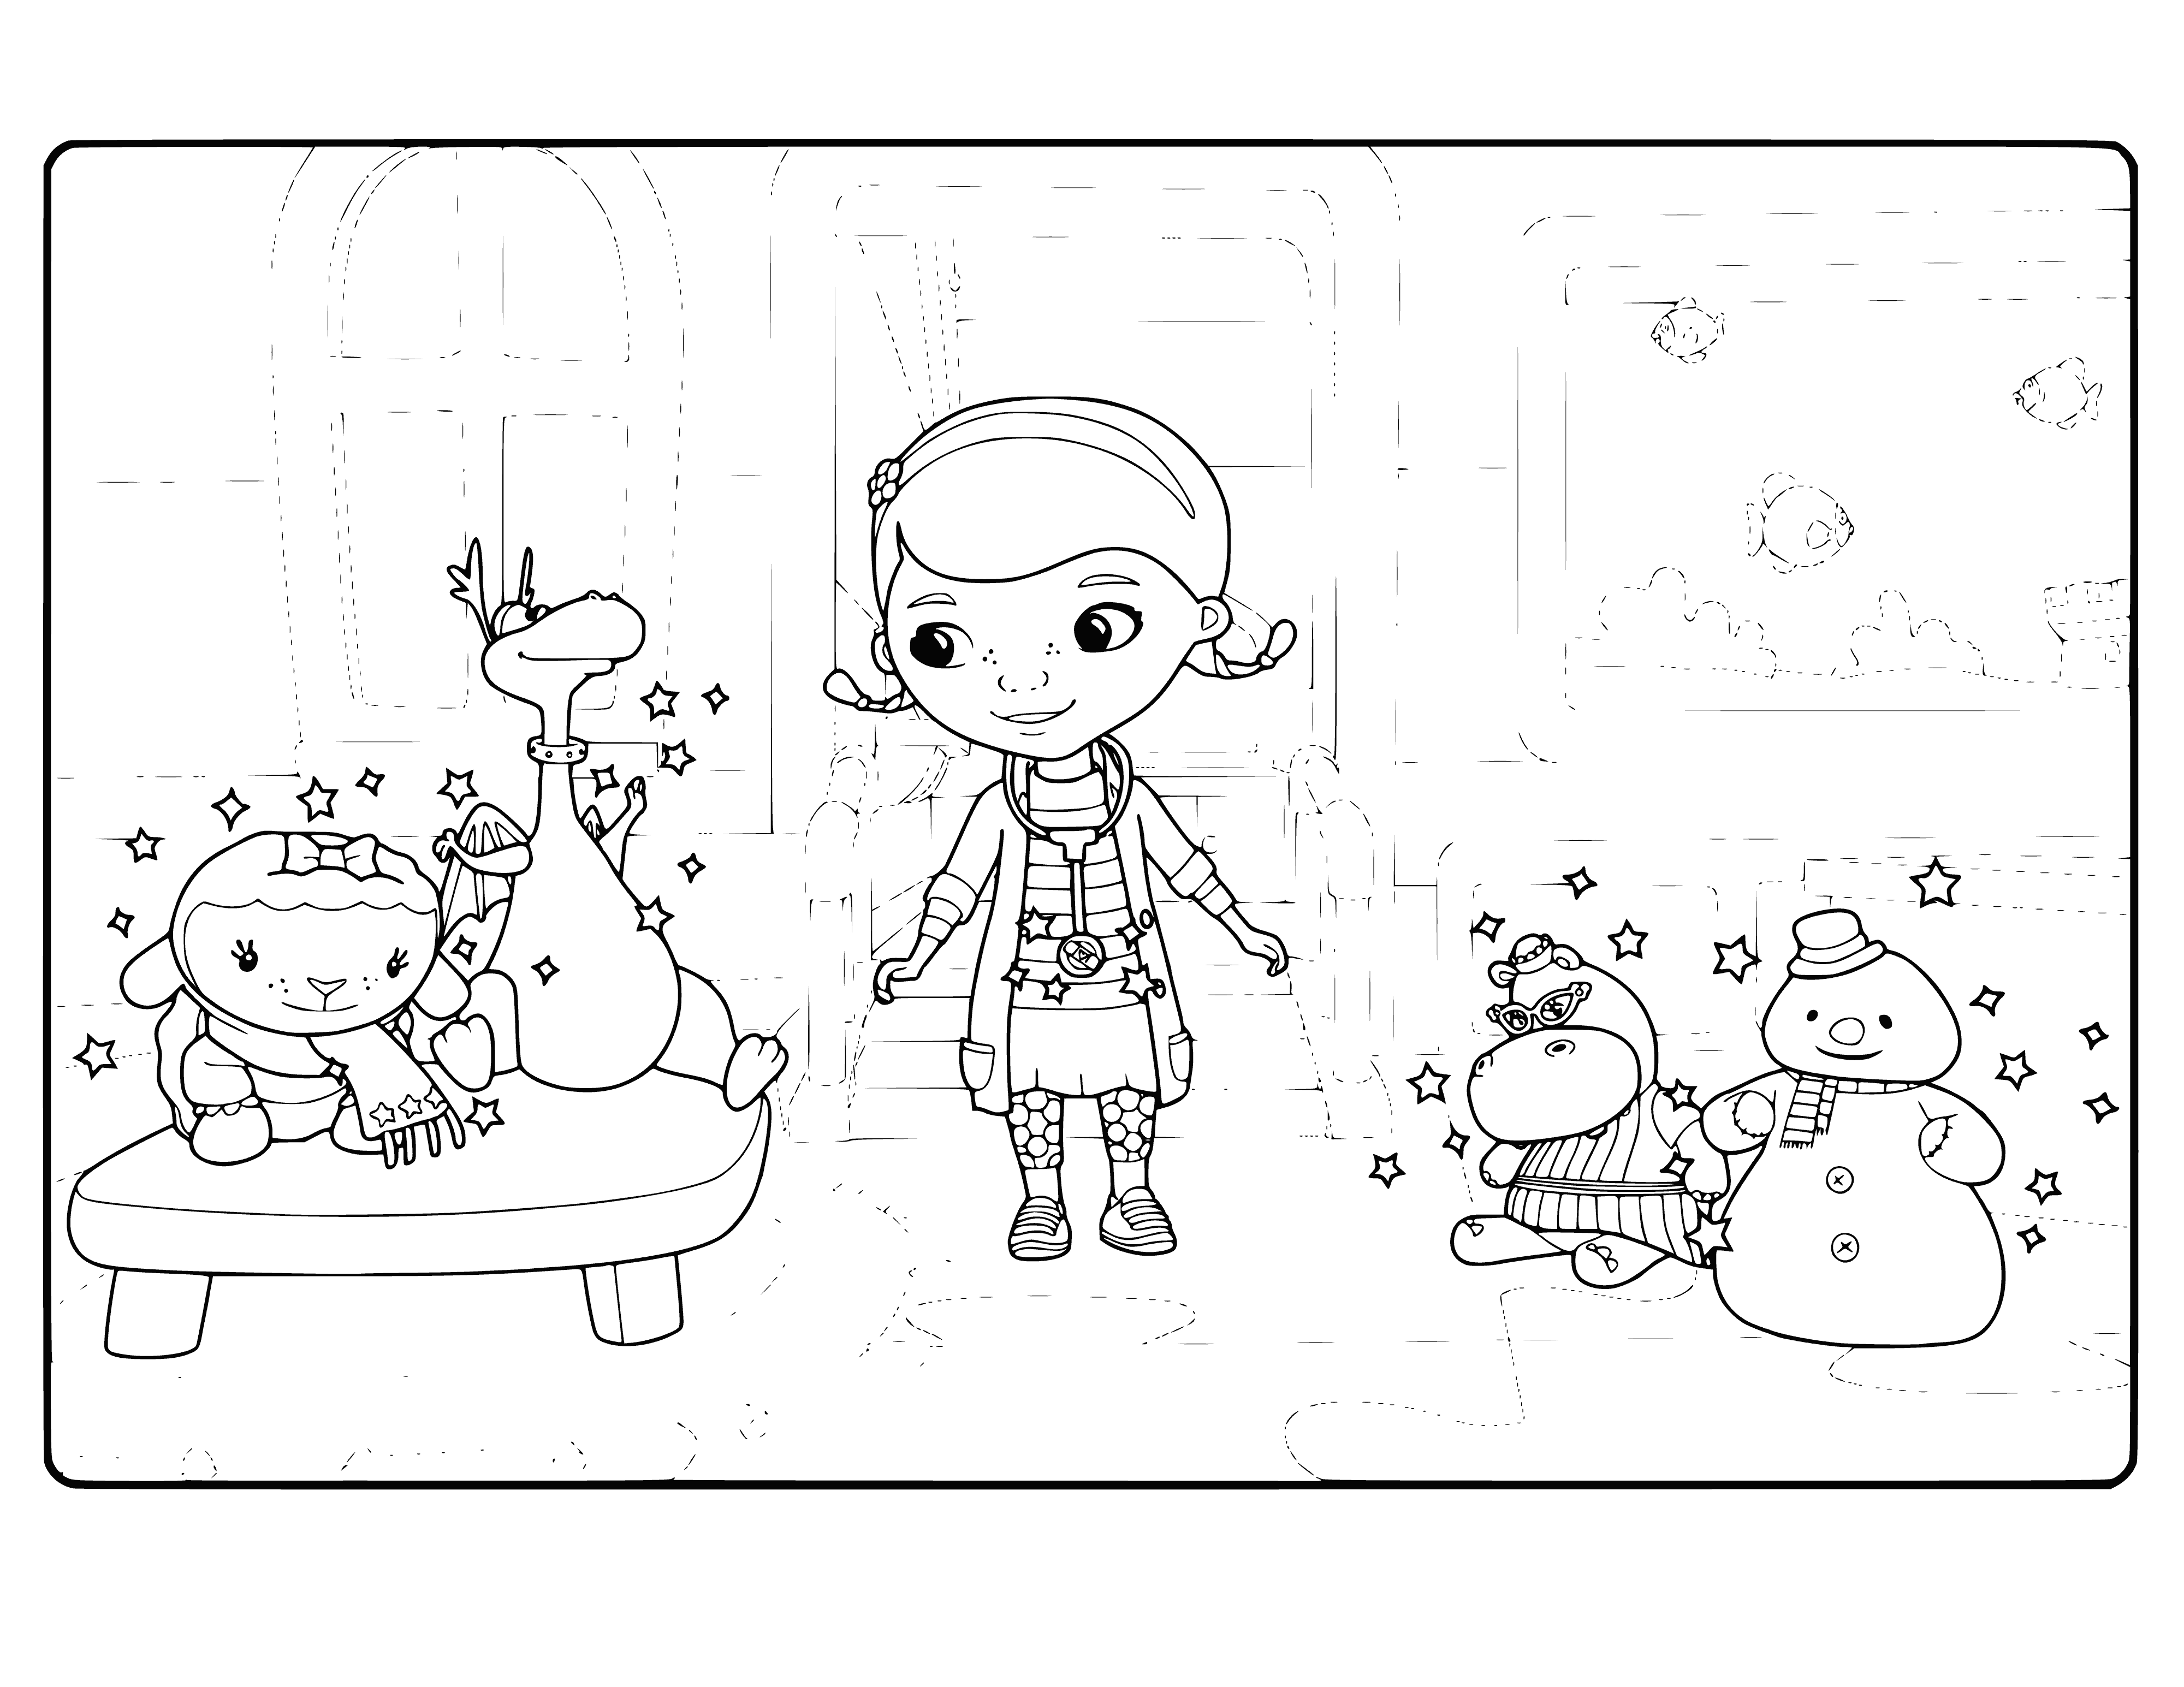 Toys come to life coloring page